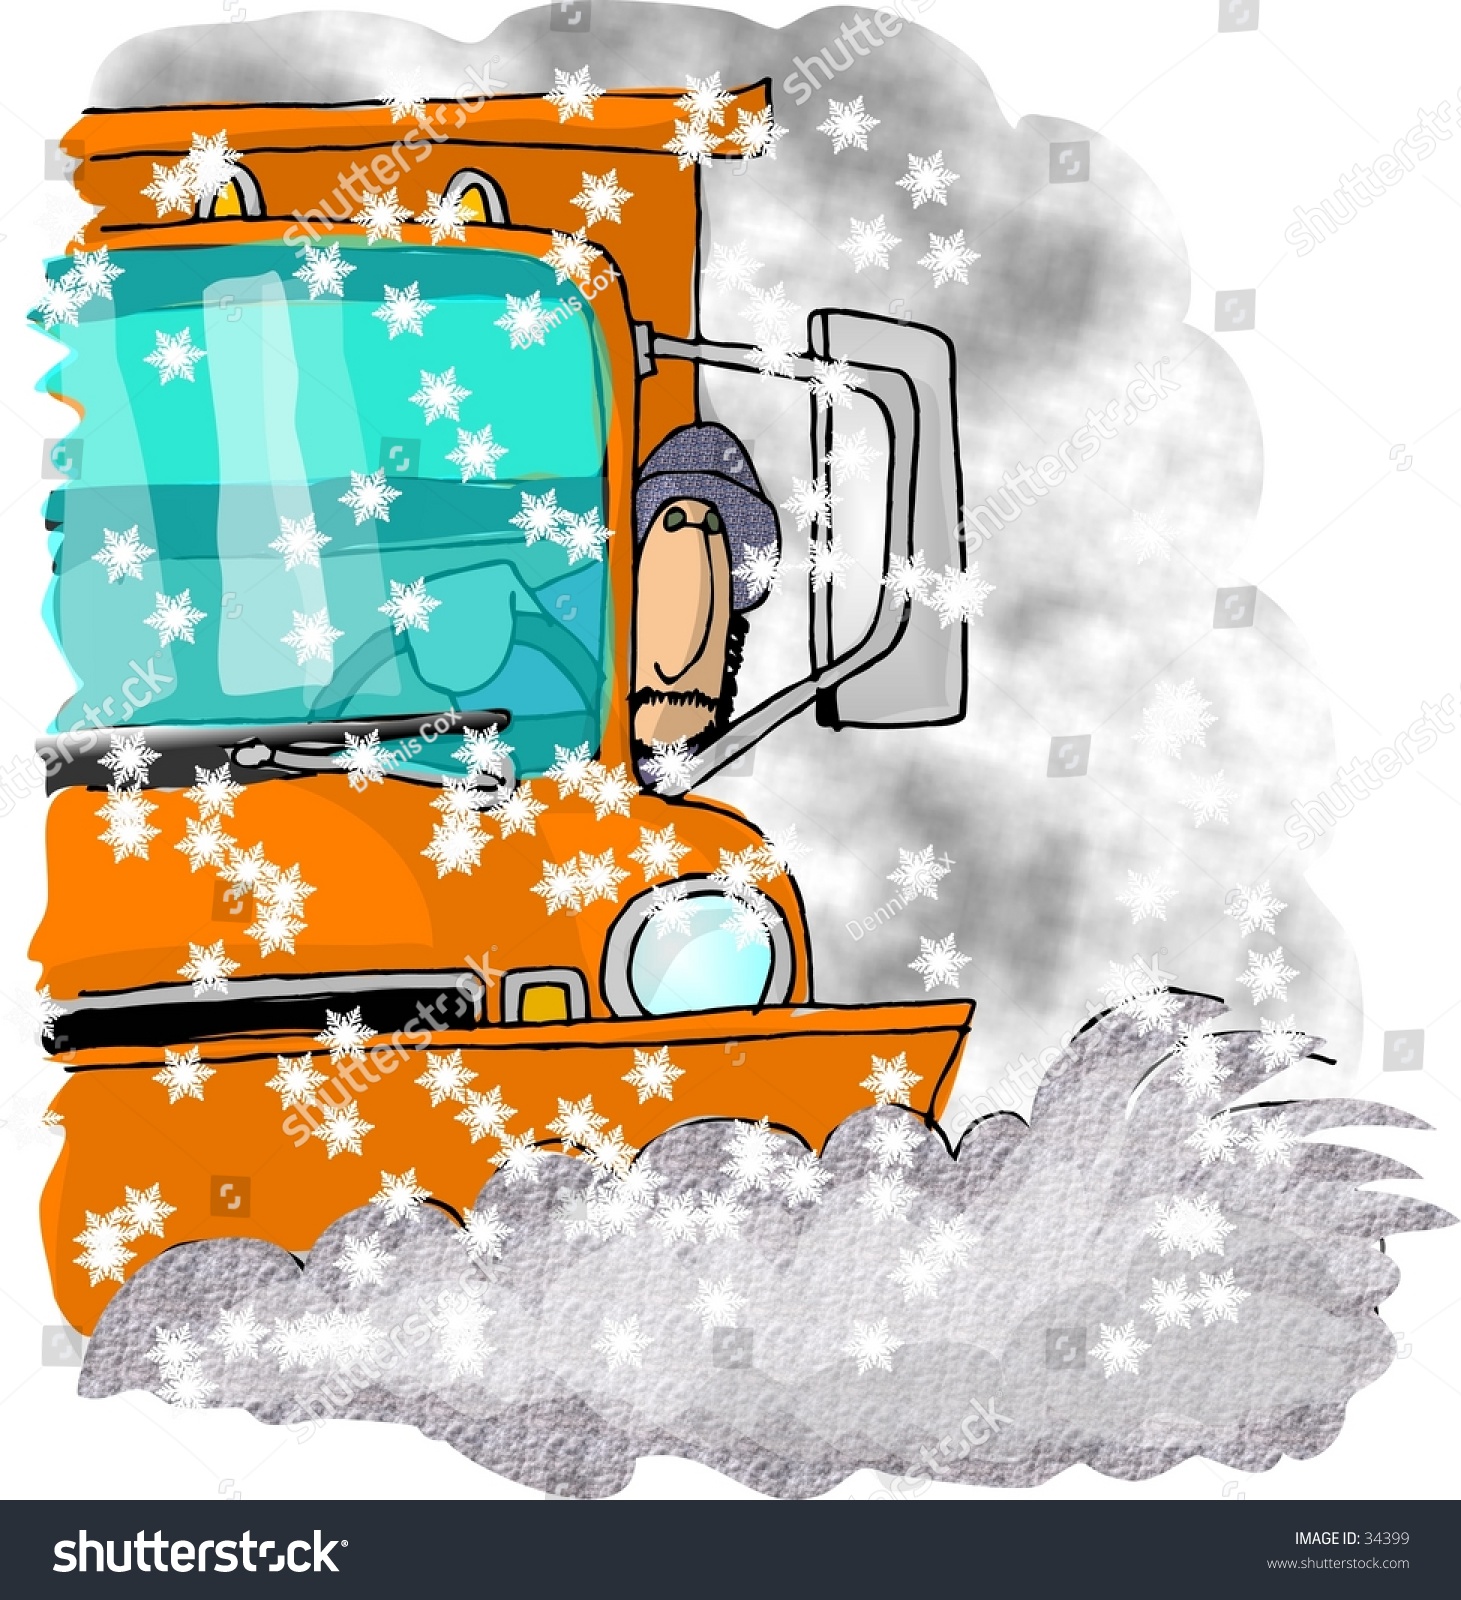 clipart driving in snow - photo #22